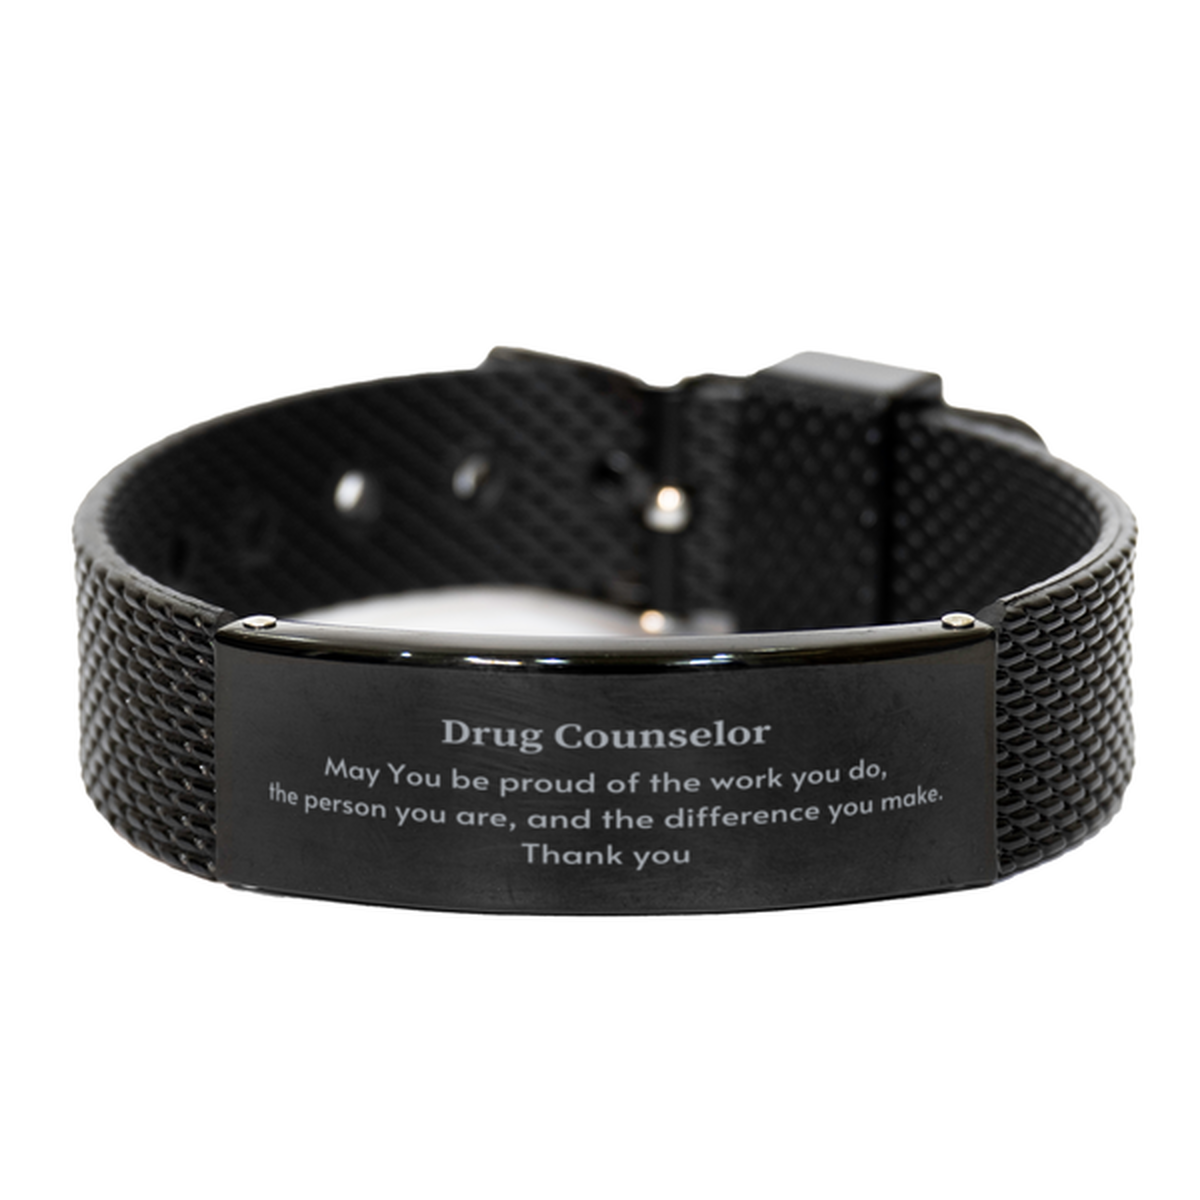 Heartwarming Black Shark Mesh Bracelet Retirement Coworkers Gifts for Drug Counselor, Drug Counselor May You be proud of the work you do, the person you are Gifts for Boss Men Women Friends